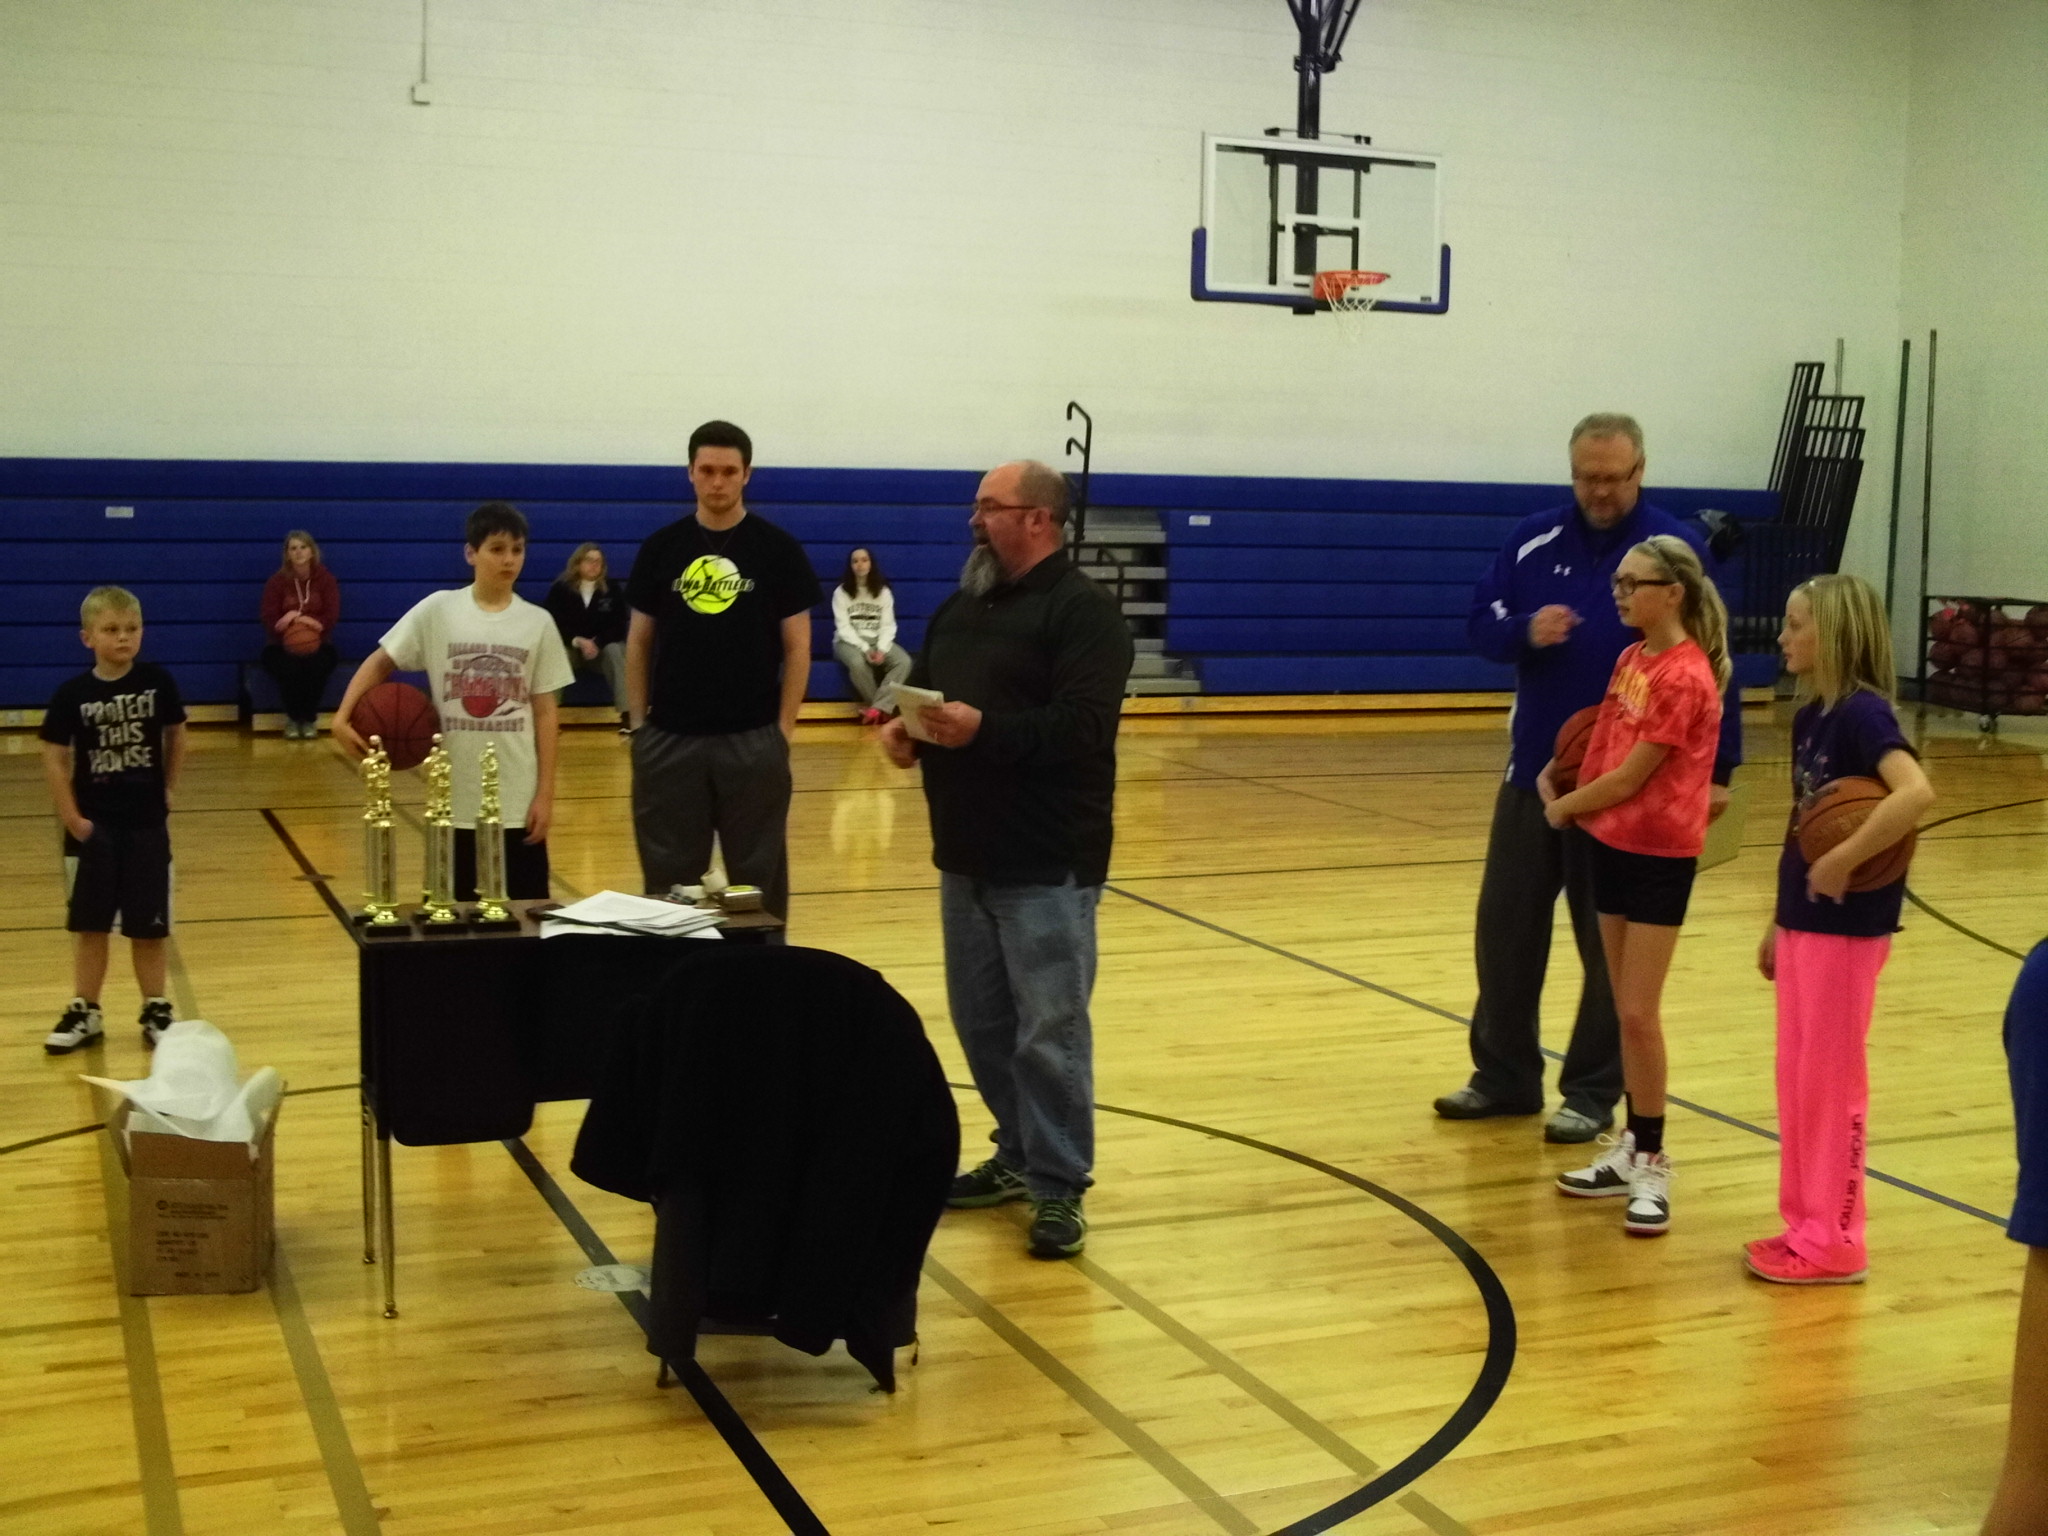 Perry Elk Mark McCarty, center, explains the ground rules to the young competitors in the 42nd annual Perry Elks Lodge Hoop Shoot.